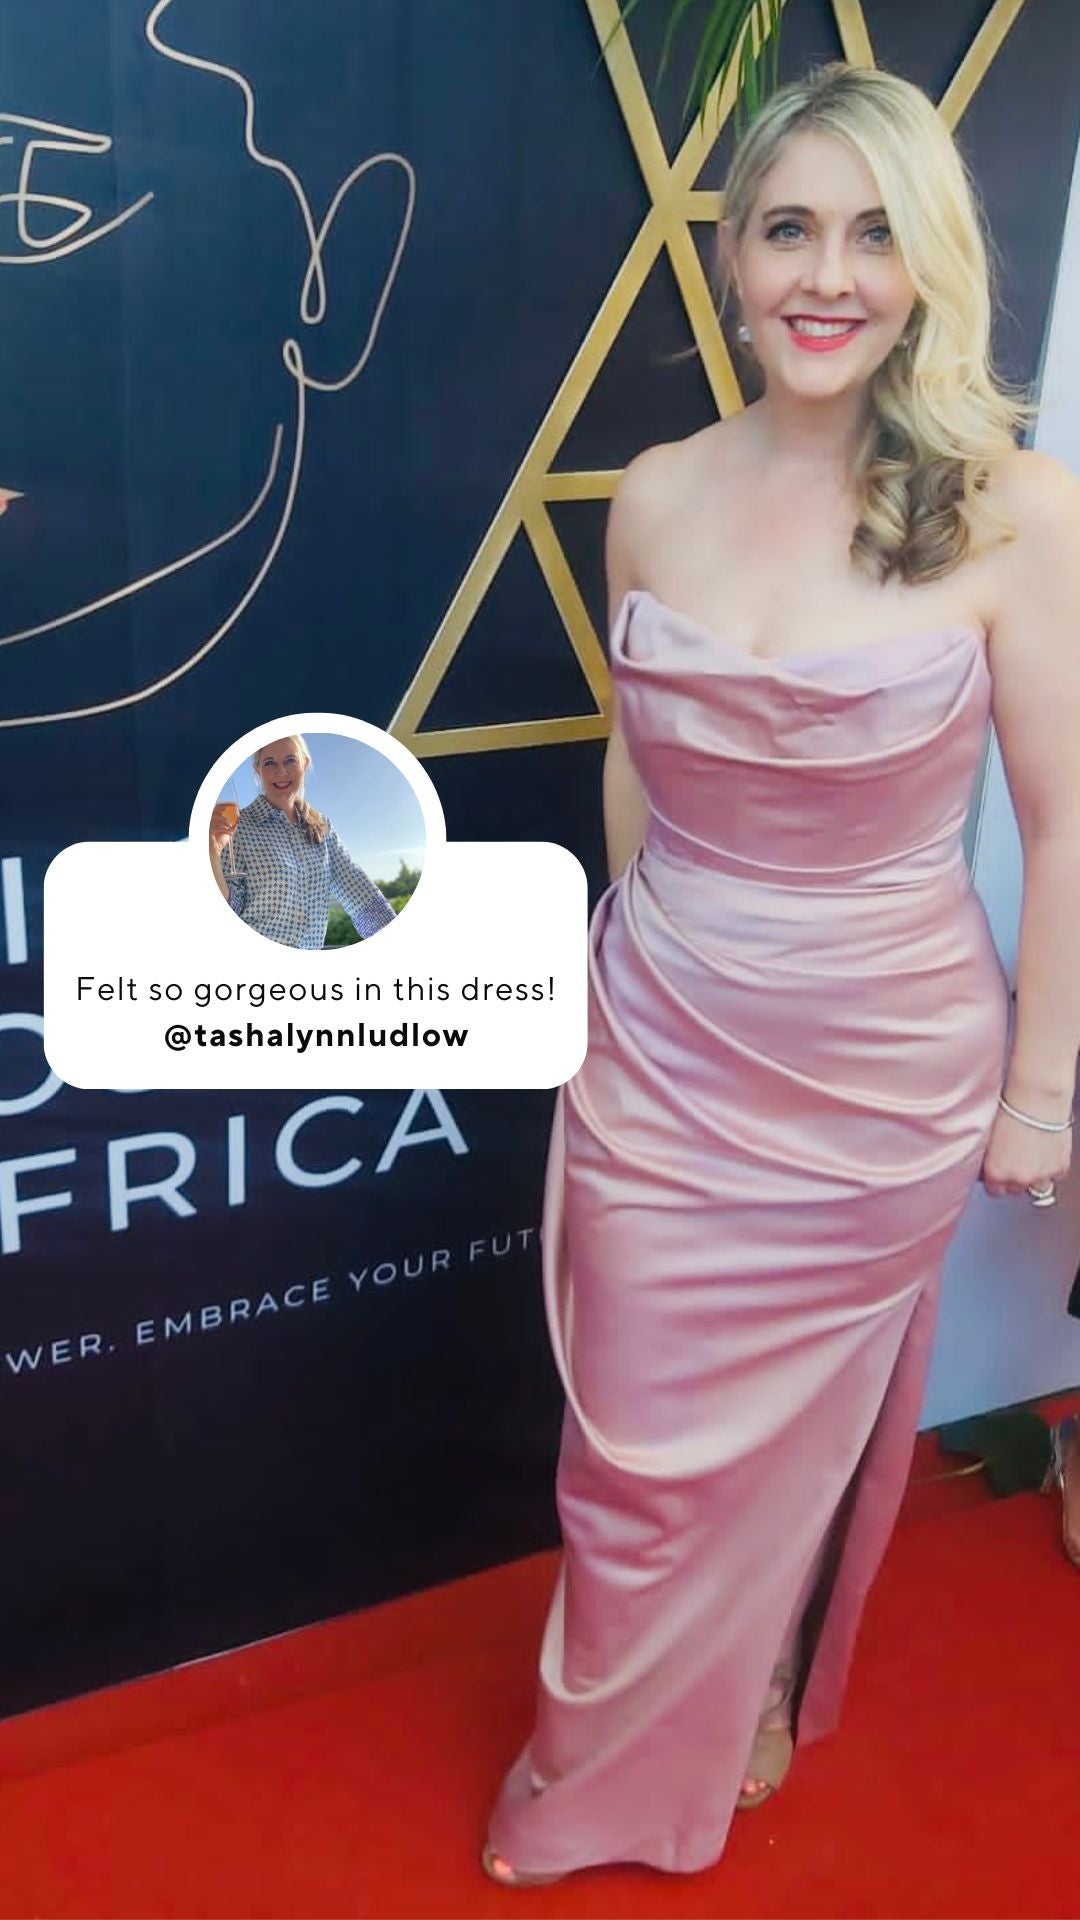 A woman in a pink dress standing on a red carpet.